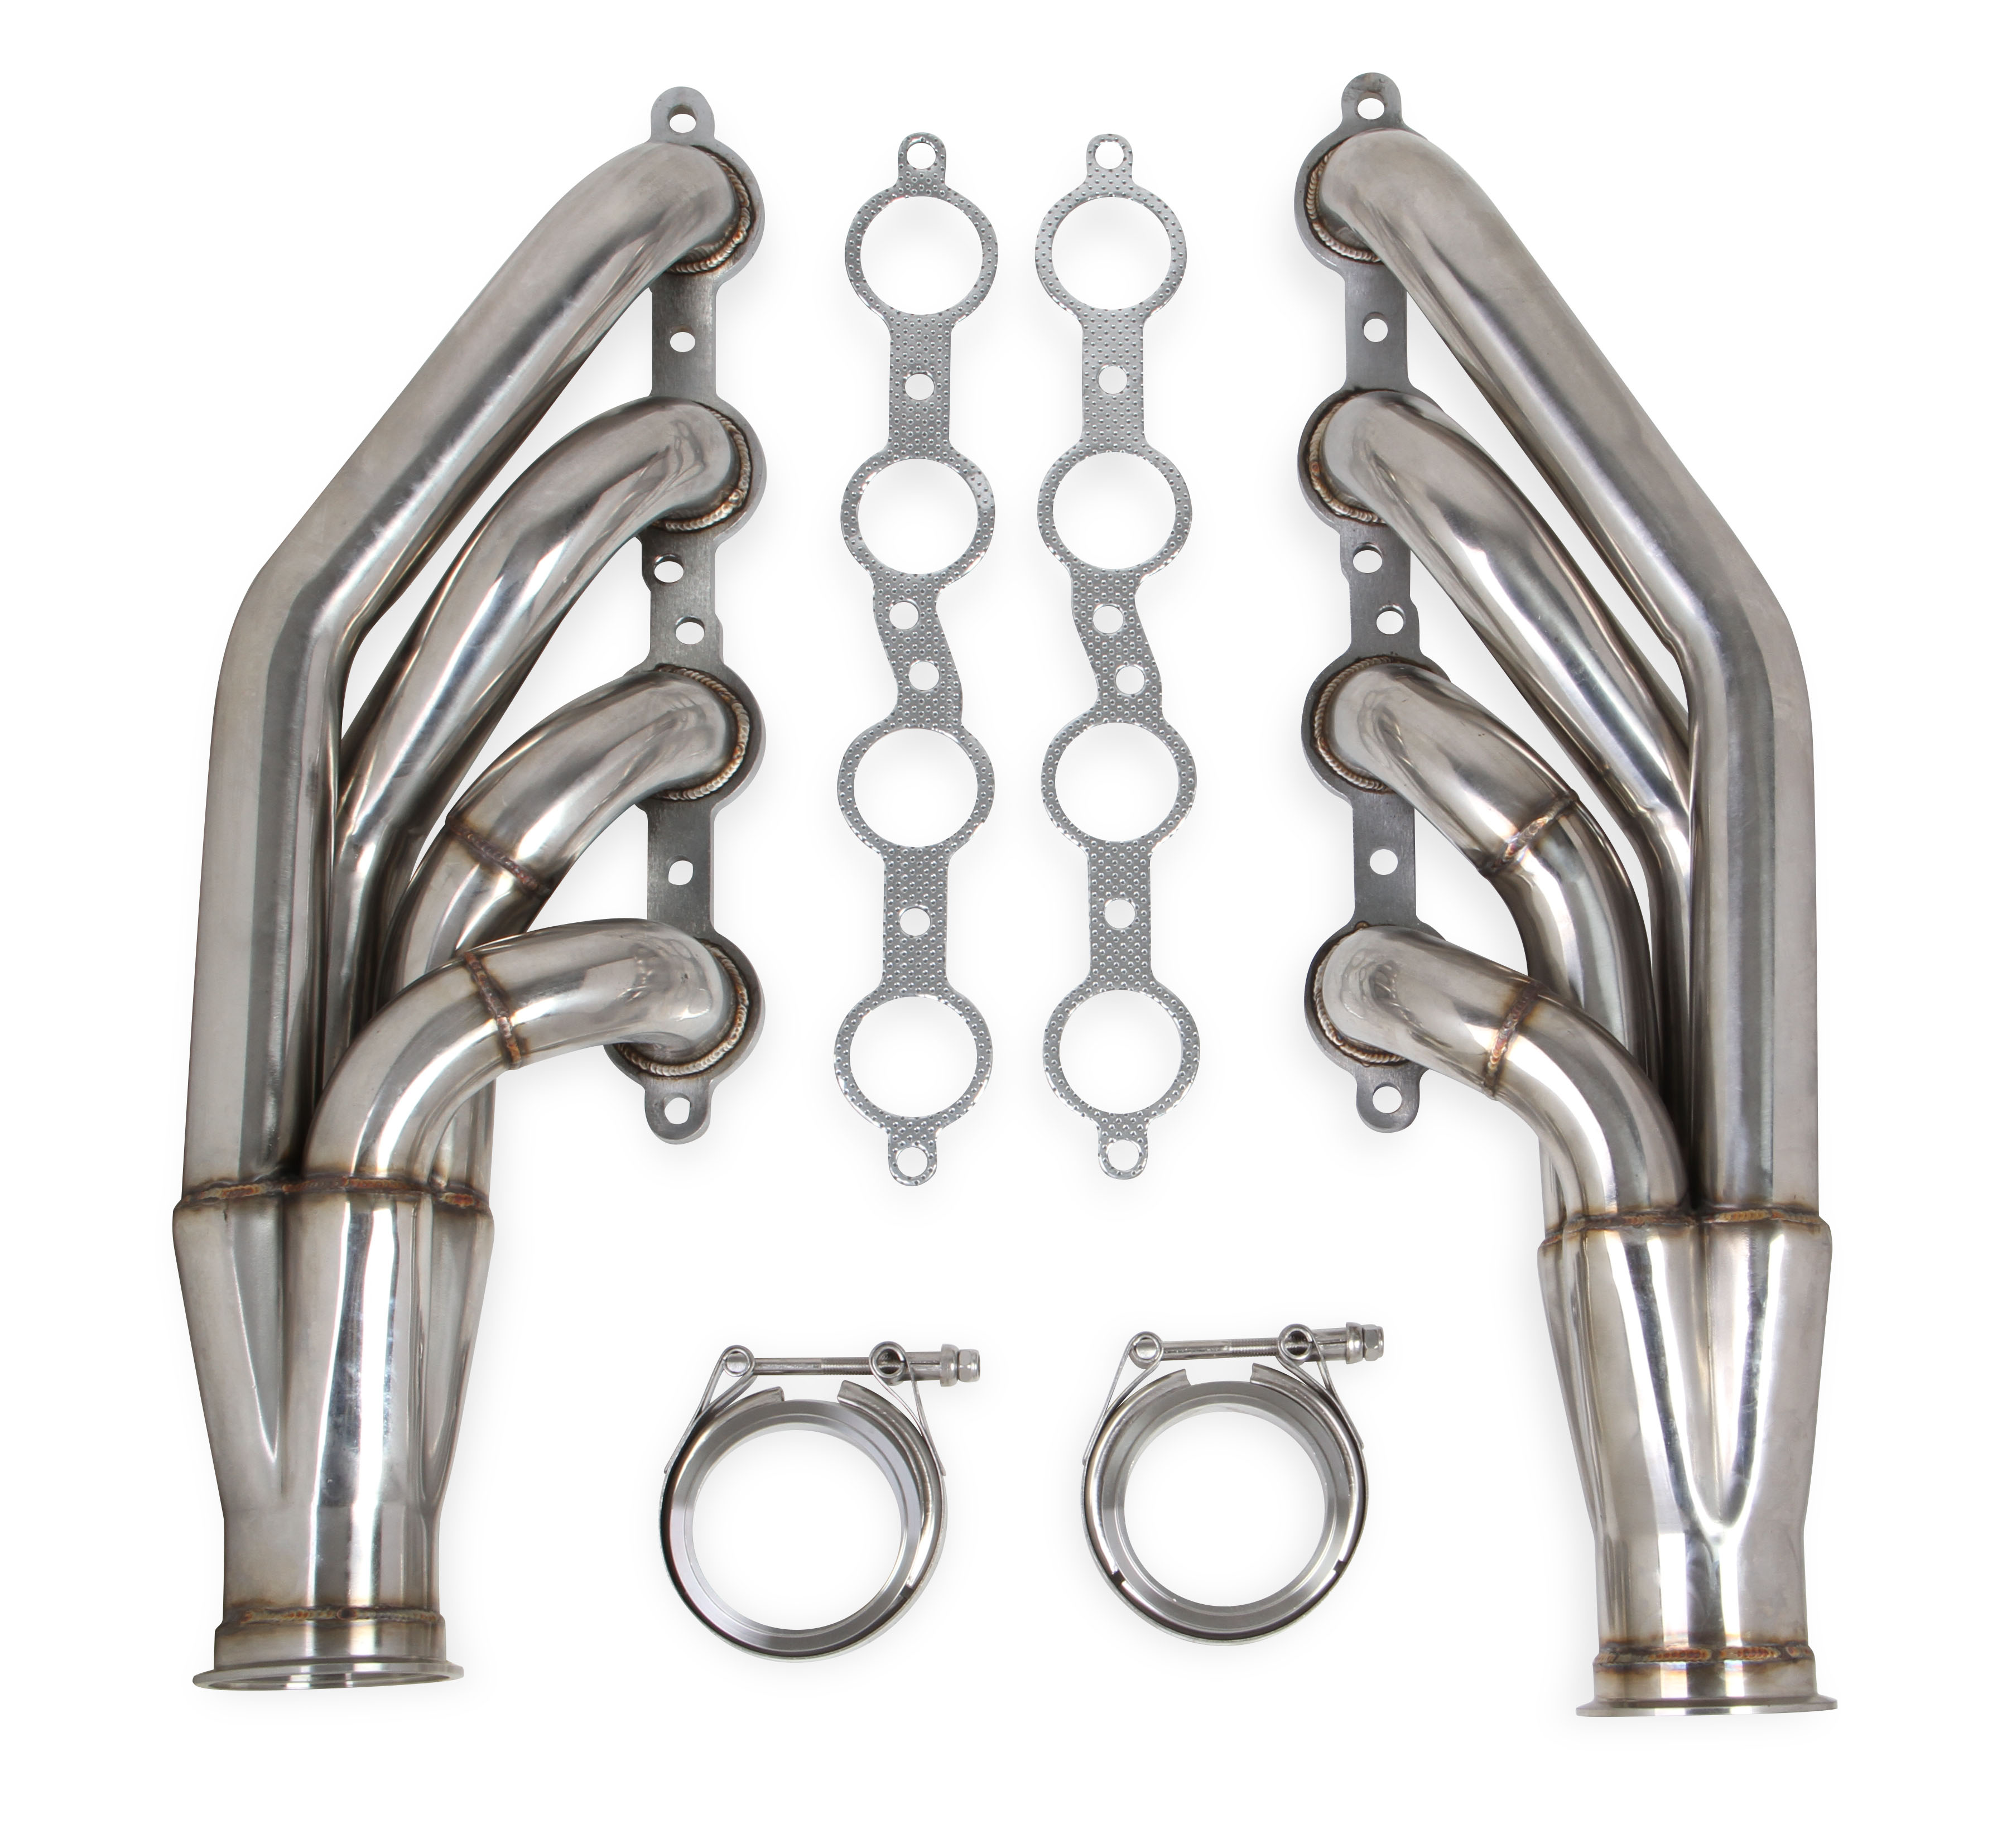 Flowtech LS 4.8L/5.3L/6.0L V8 1 3/4" 304 Stainless Turbo Headers - Polished Finish